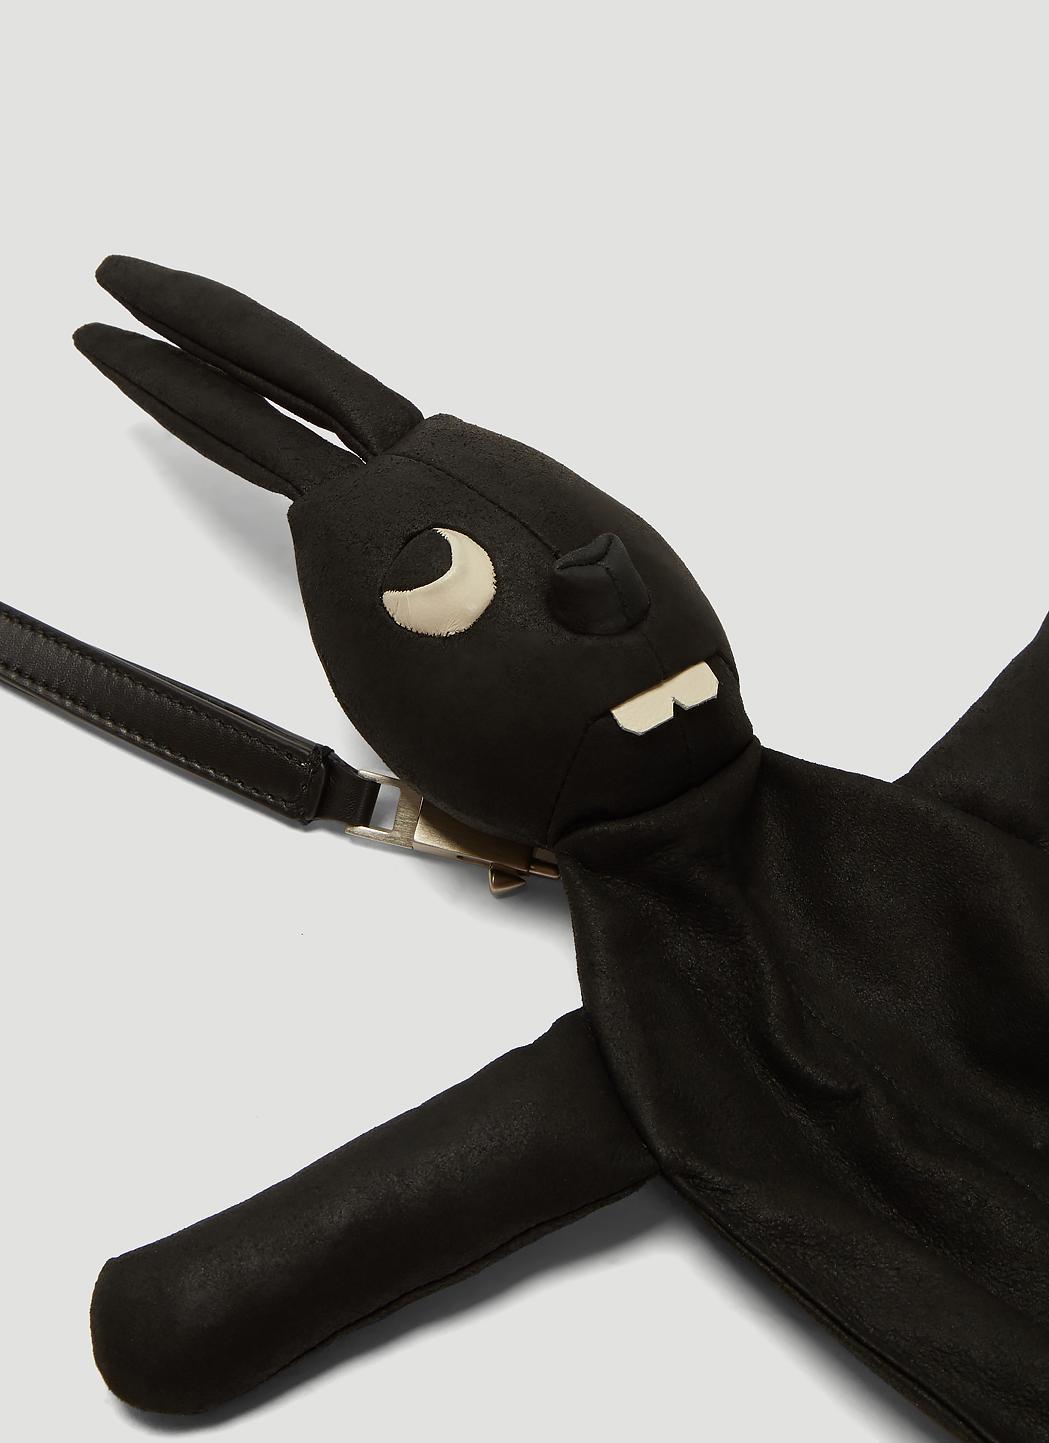 Rick Owens Leather Bunny Pouch Bag In Black for Men - Lyst